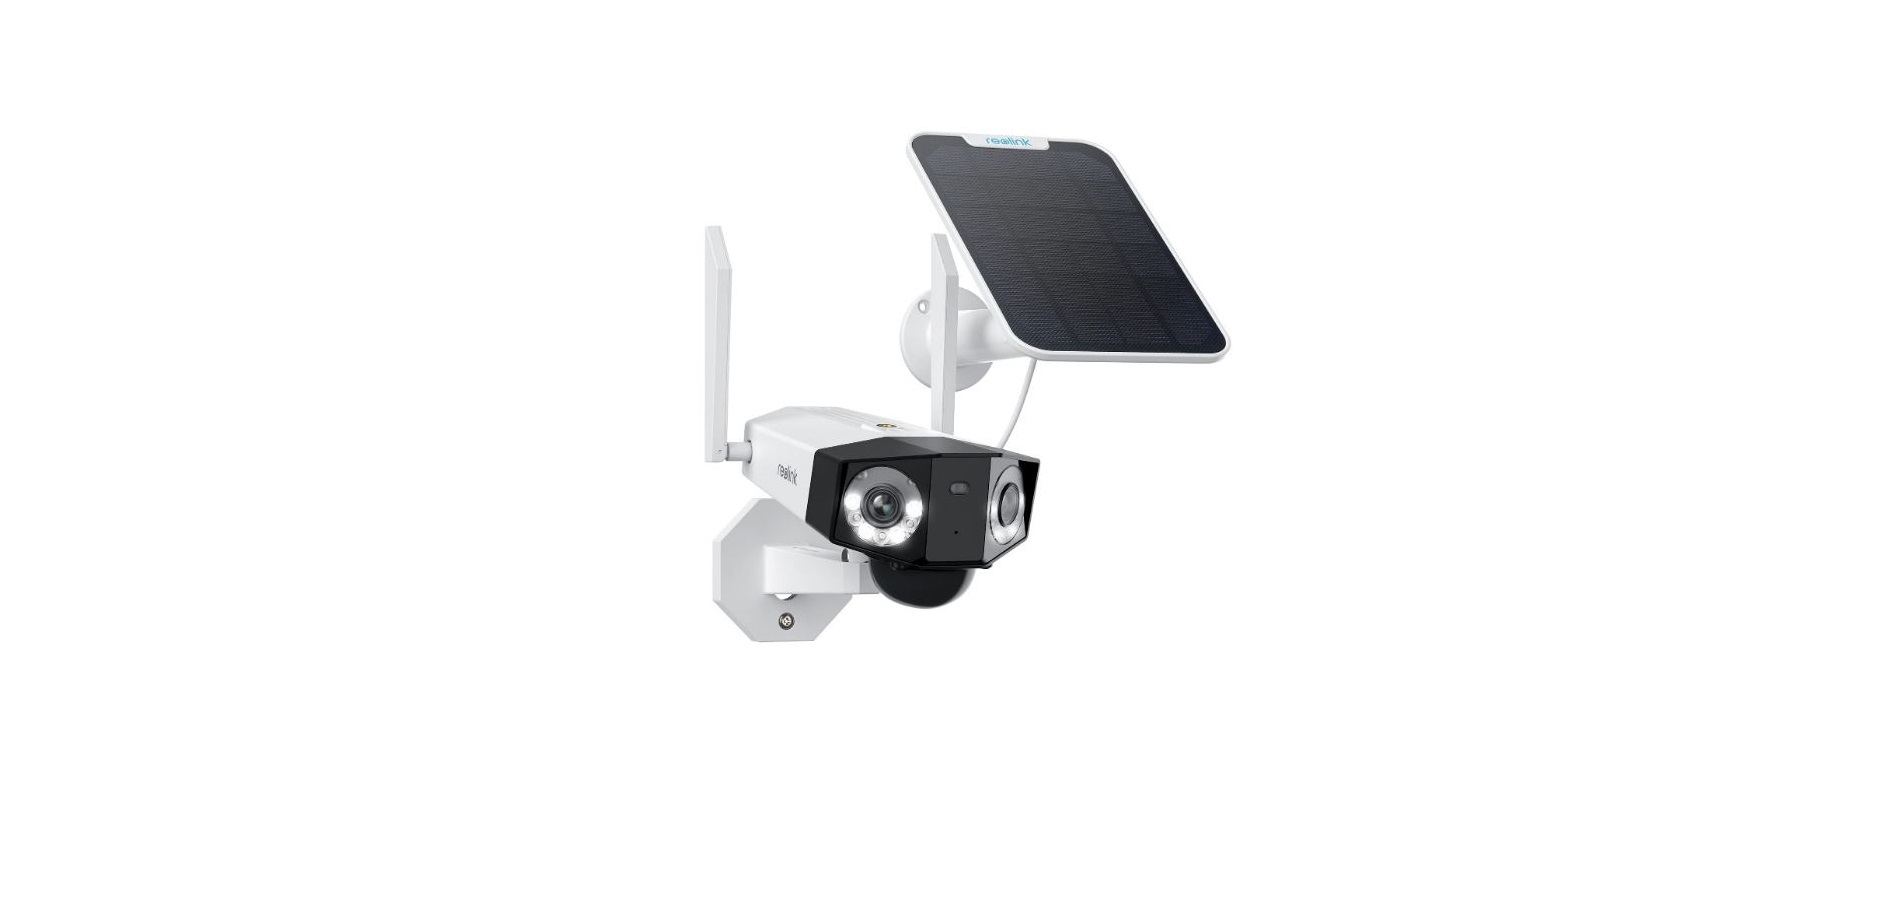 Duo 4G LTE Cellular Security Camera Outdoor